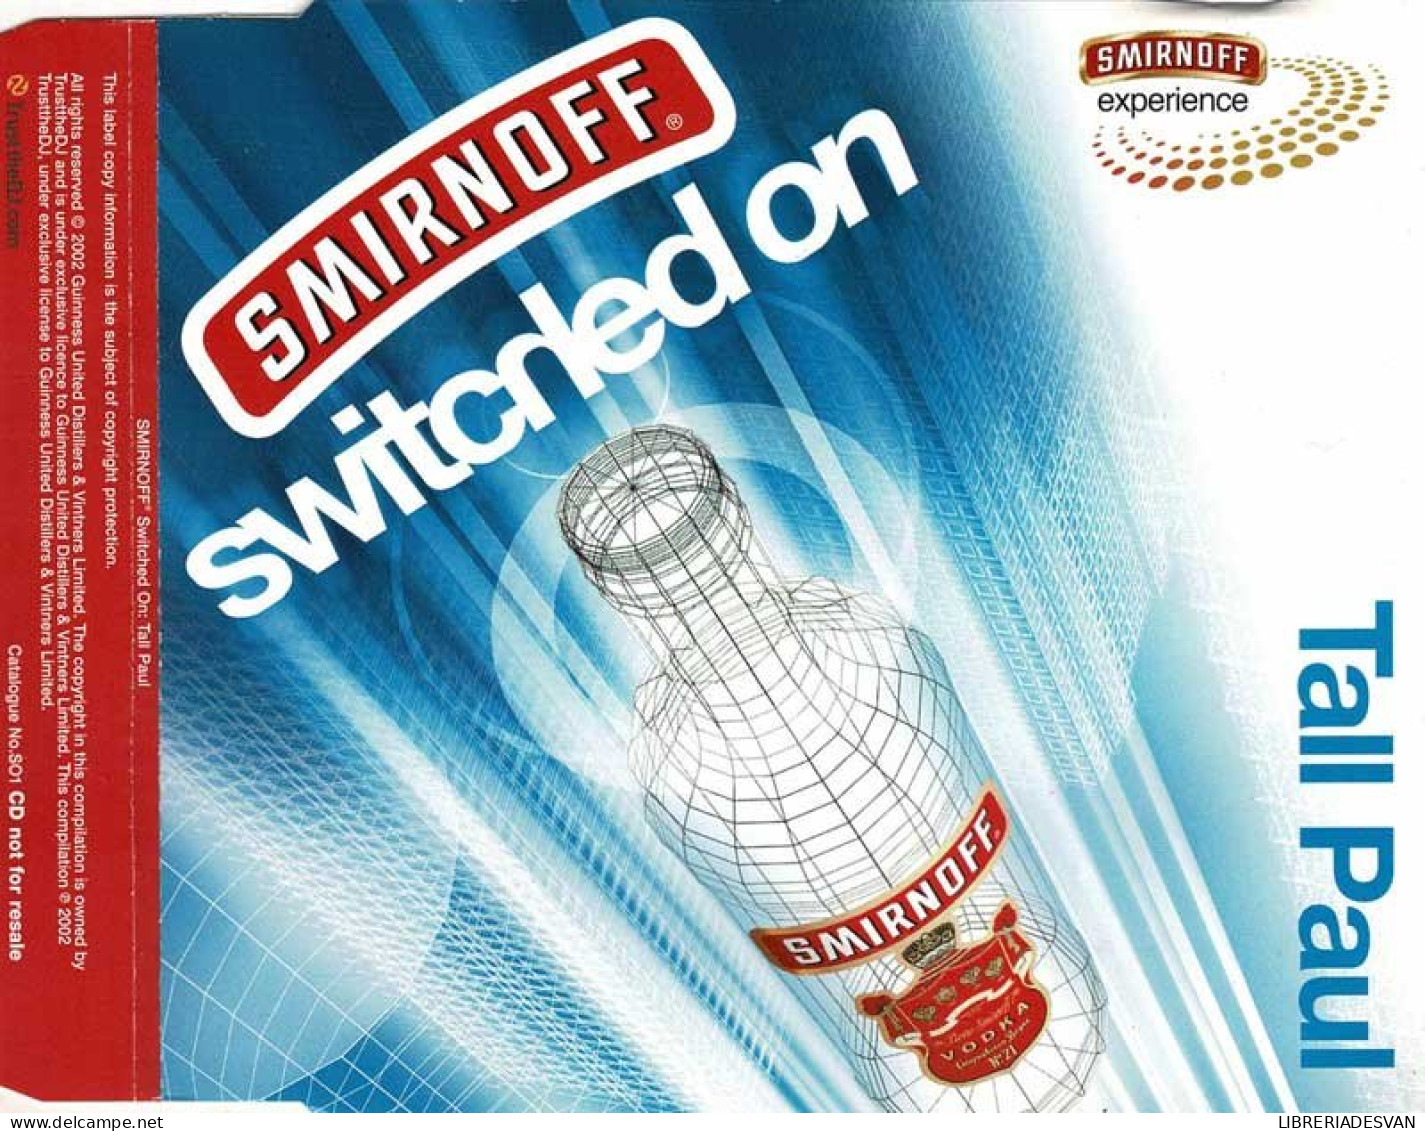 Smirnoff Switched On. Tall Paul. CD Promo Single 6 Track - Dance, Techno & House